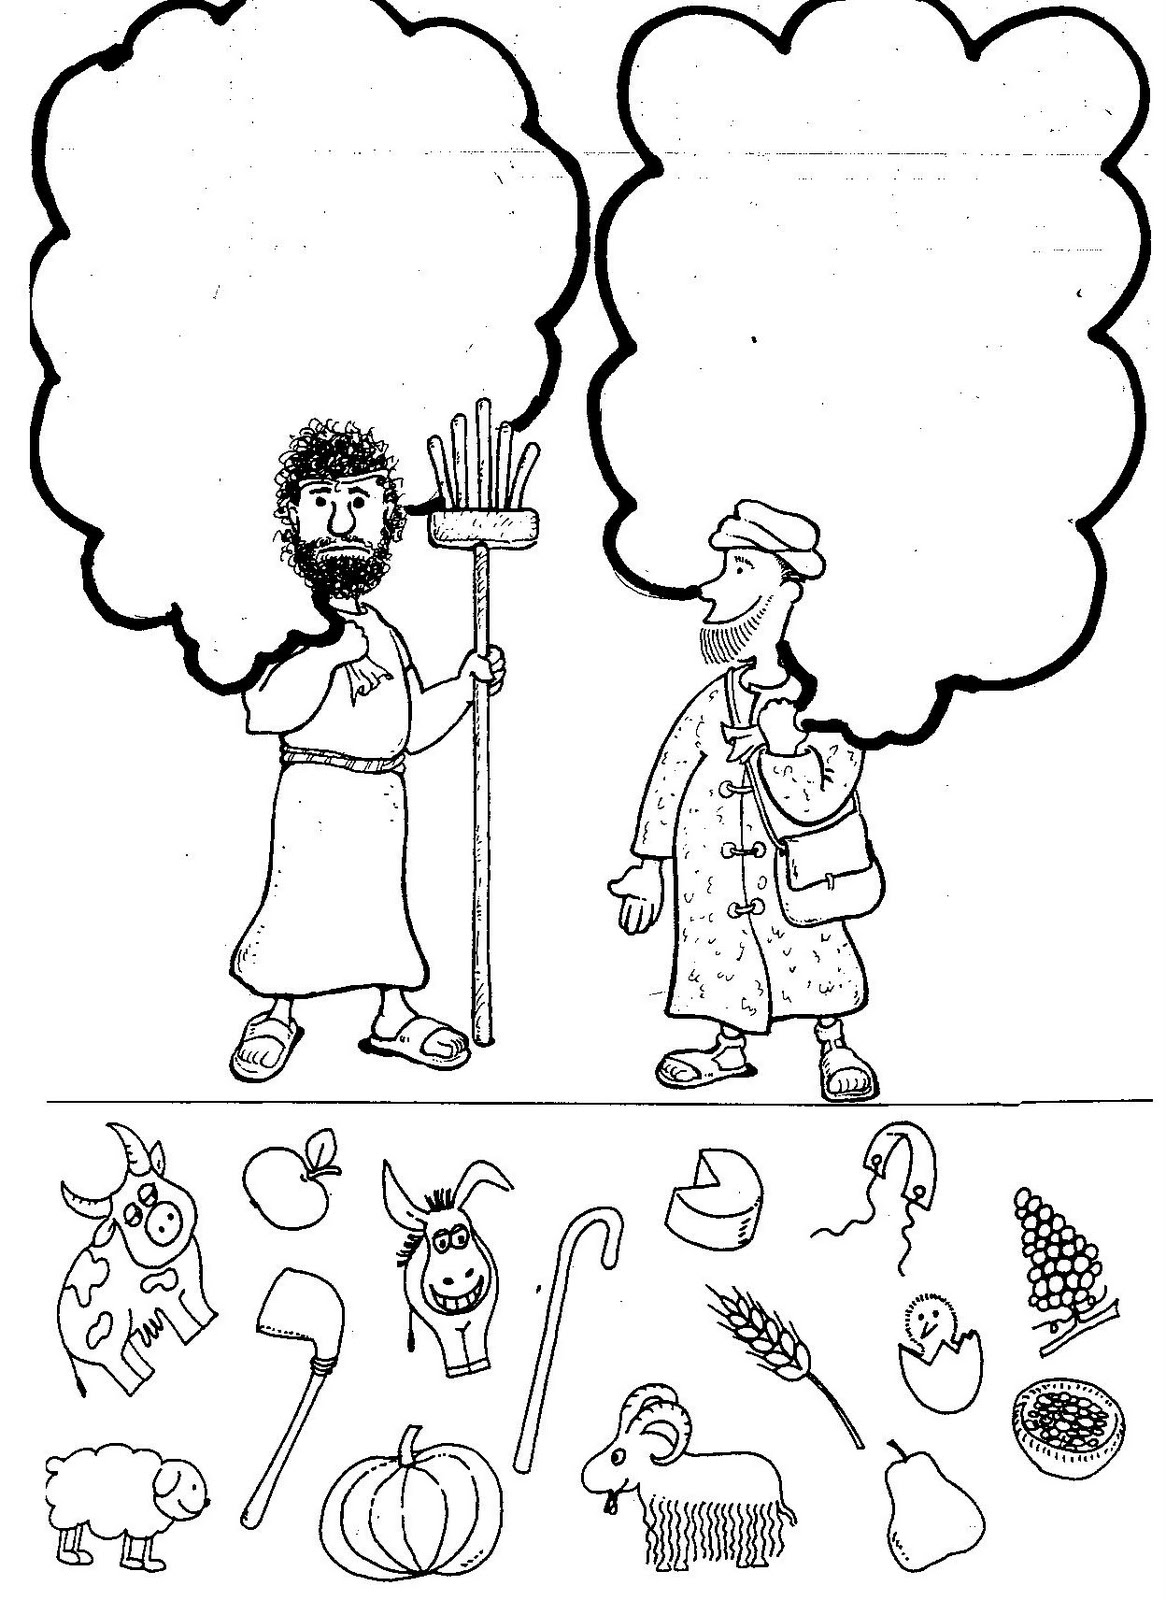 24 Cain And Abel Coloring Page | Homecolor : Homecolor